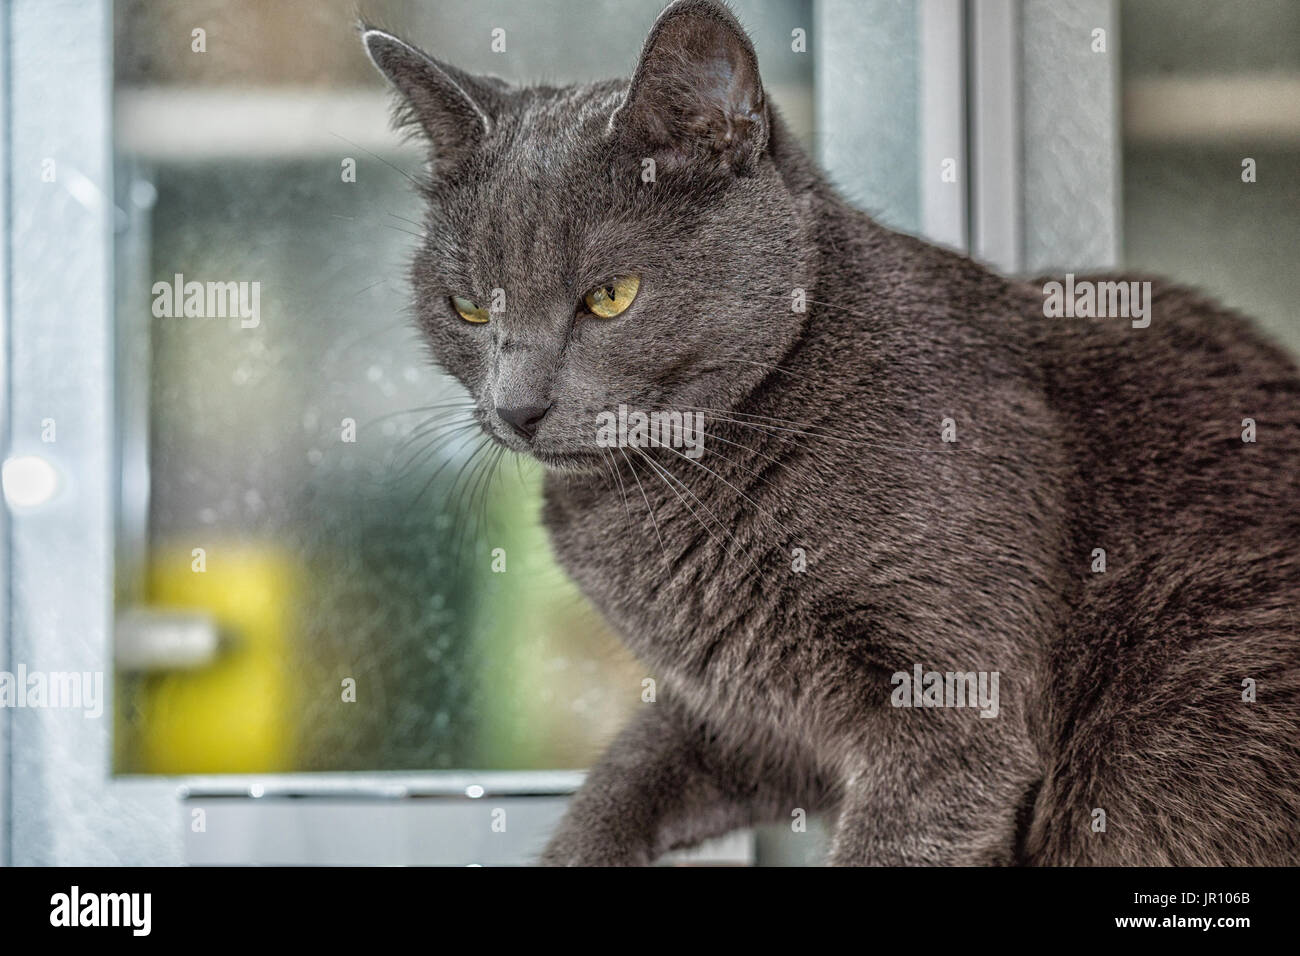 Russian blue cat looking at the fly. Stock Photo